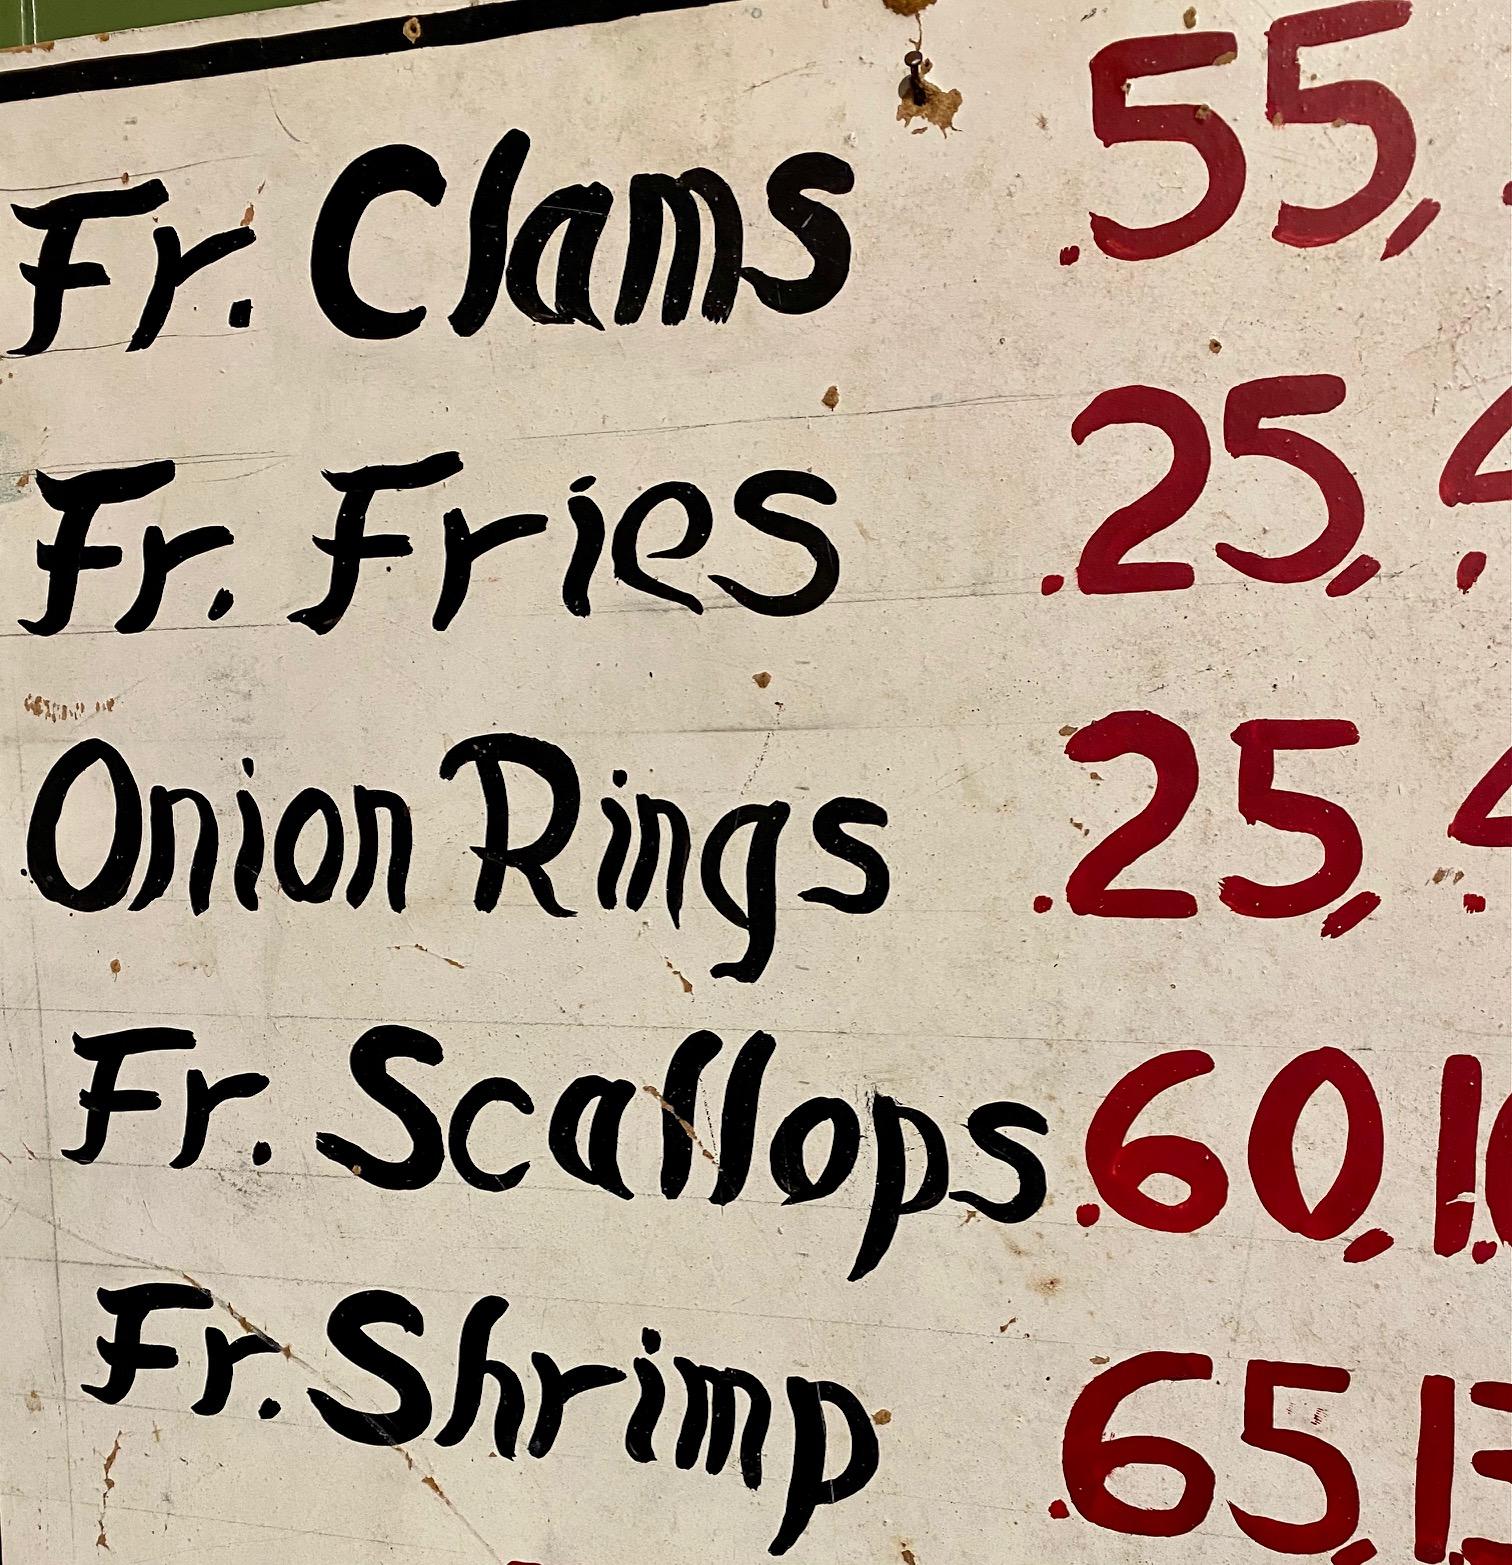 Vintage midcentury Clam Shack Menu Board, circa 1947, hand painted on Masonite panel. This sign came out of the former clam shack owner's basement in Hampton Beach, New Hampshire. It delightfully features all the classic summer beach foods, and